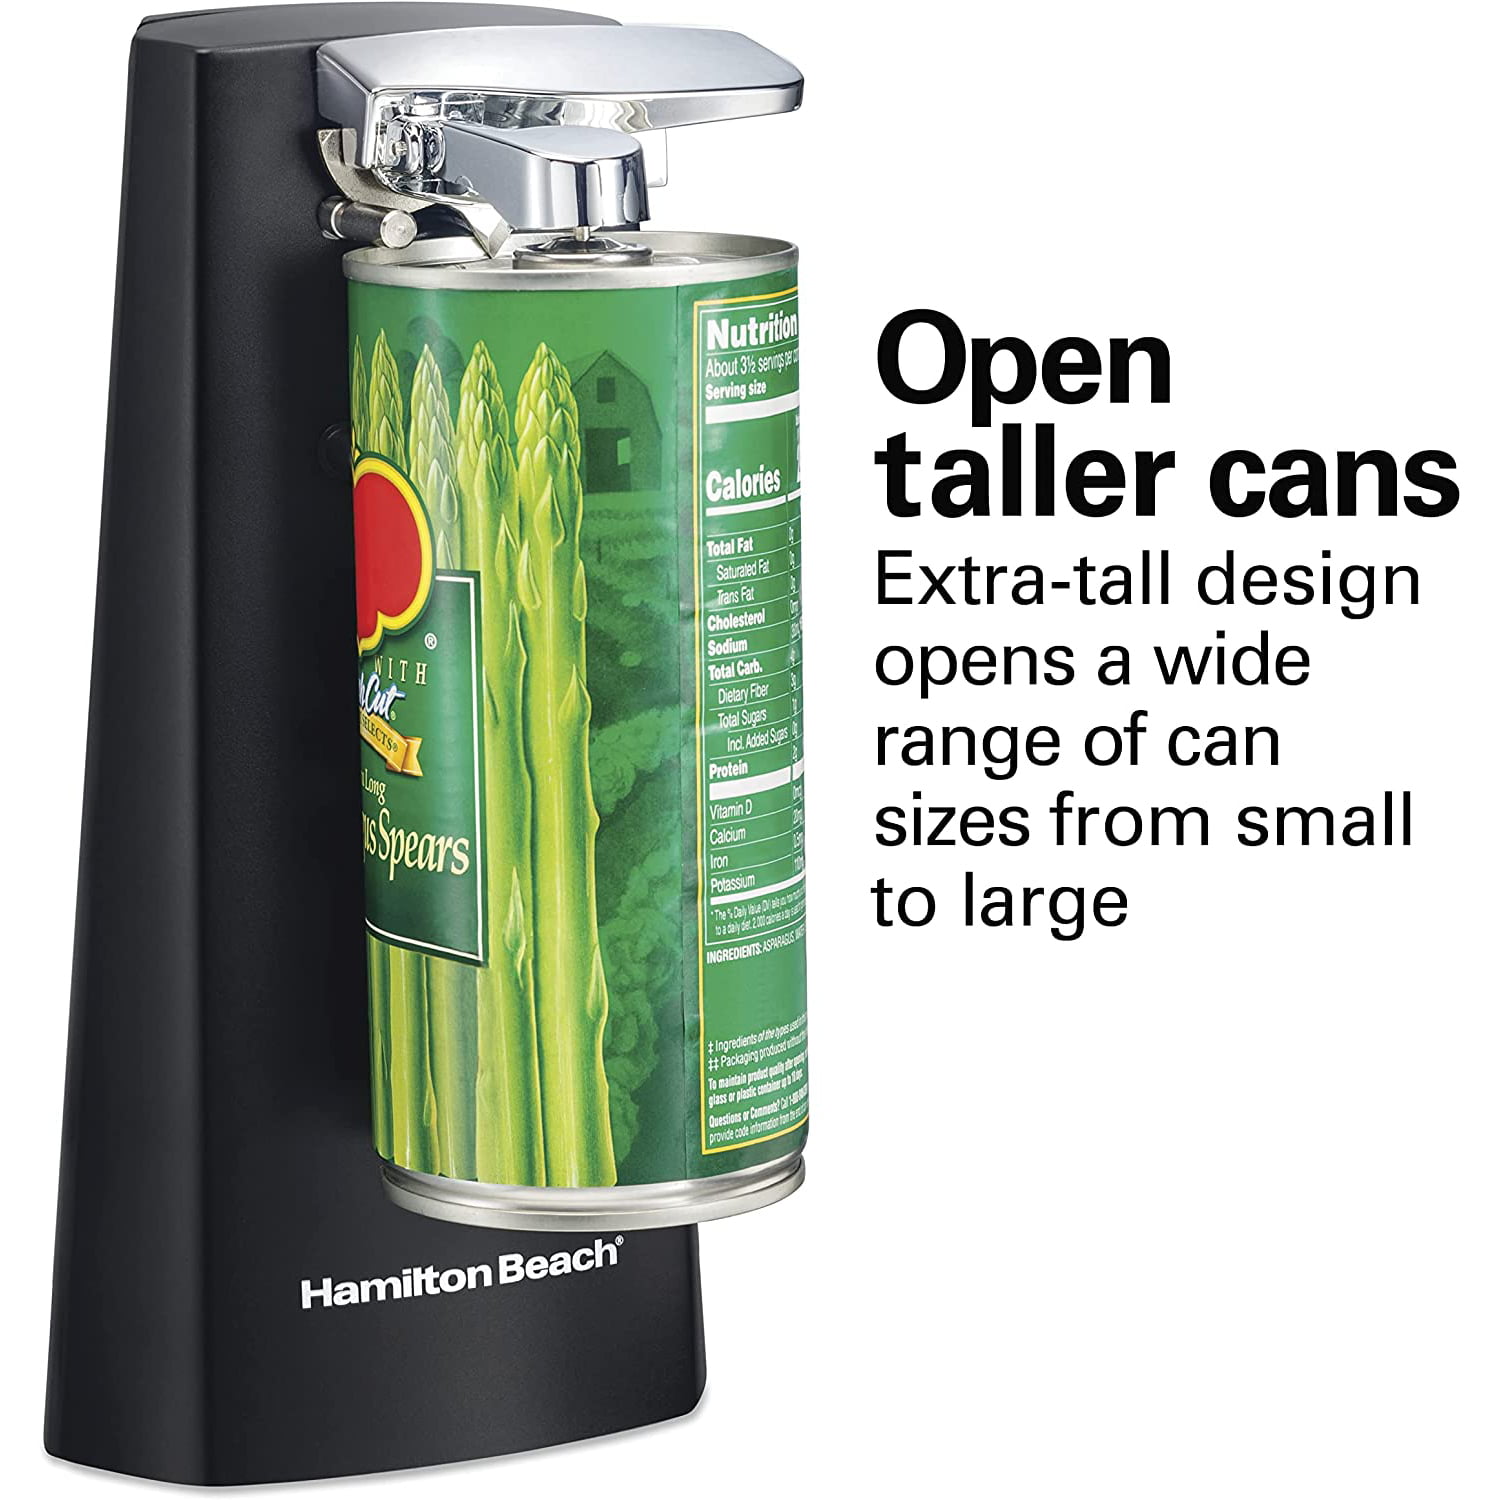 Automatic opener opens more than cans - CNET